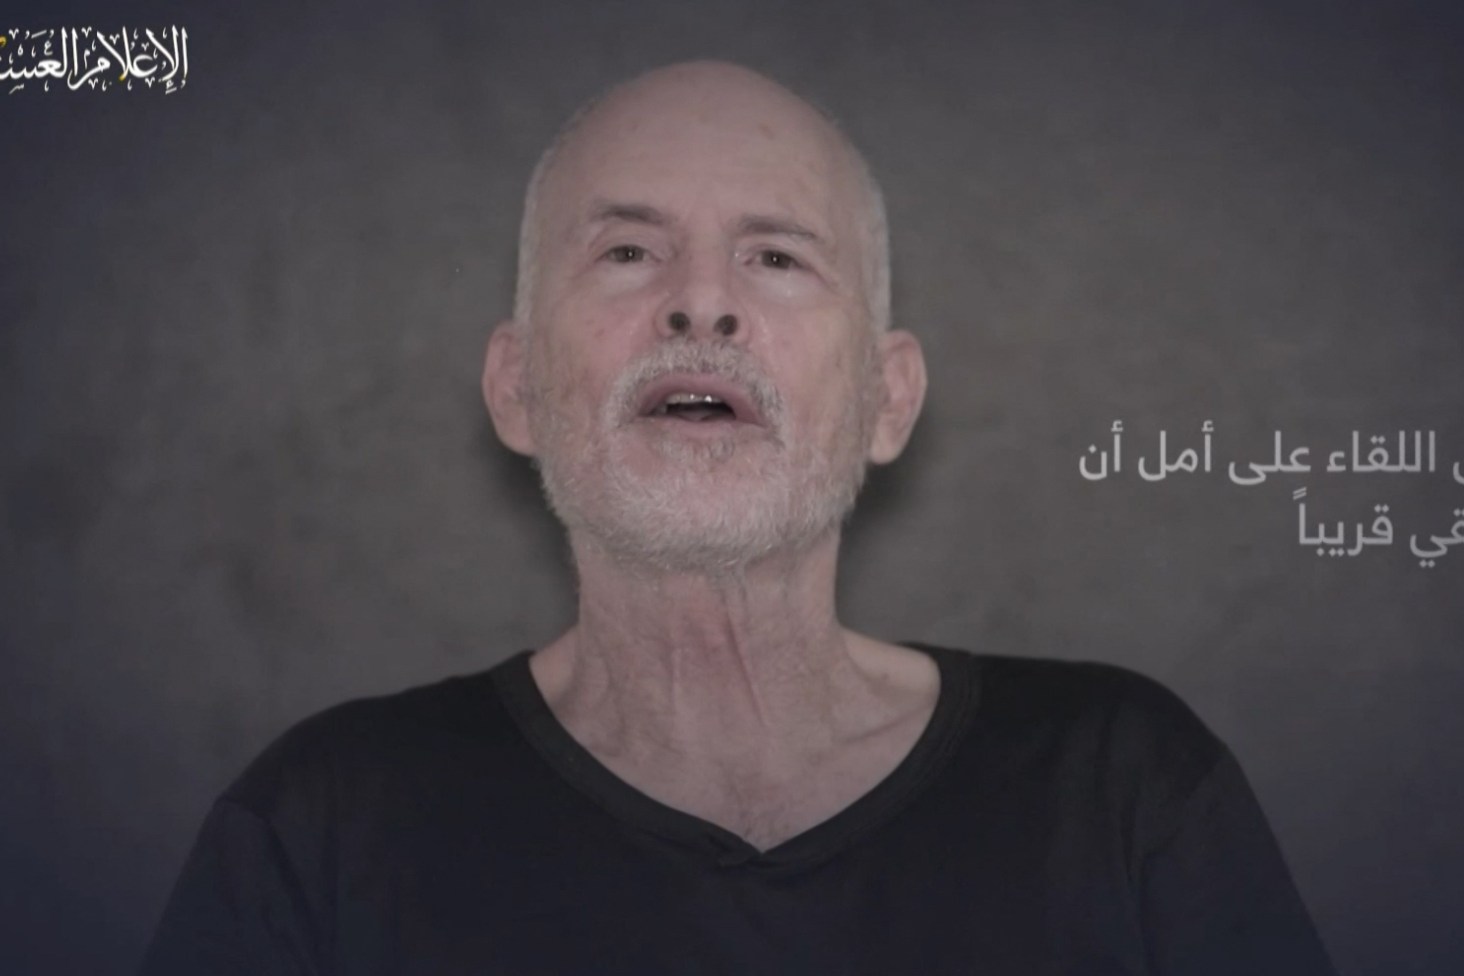 Hamas releases another Israeli hostage video